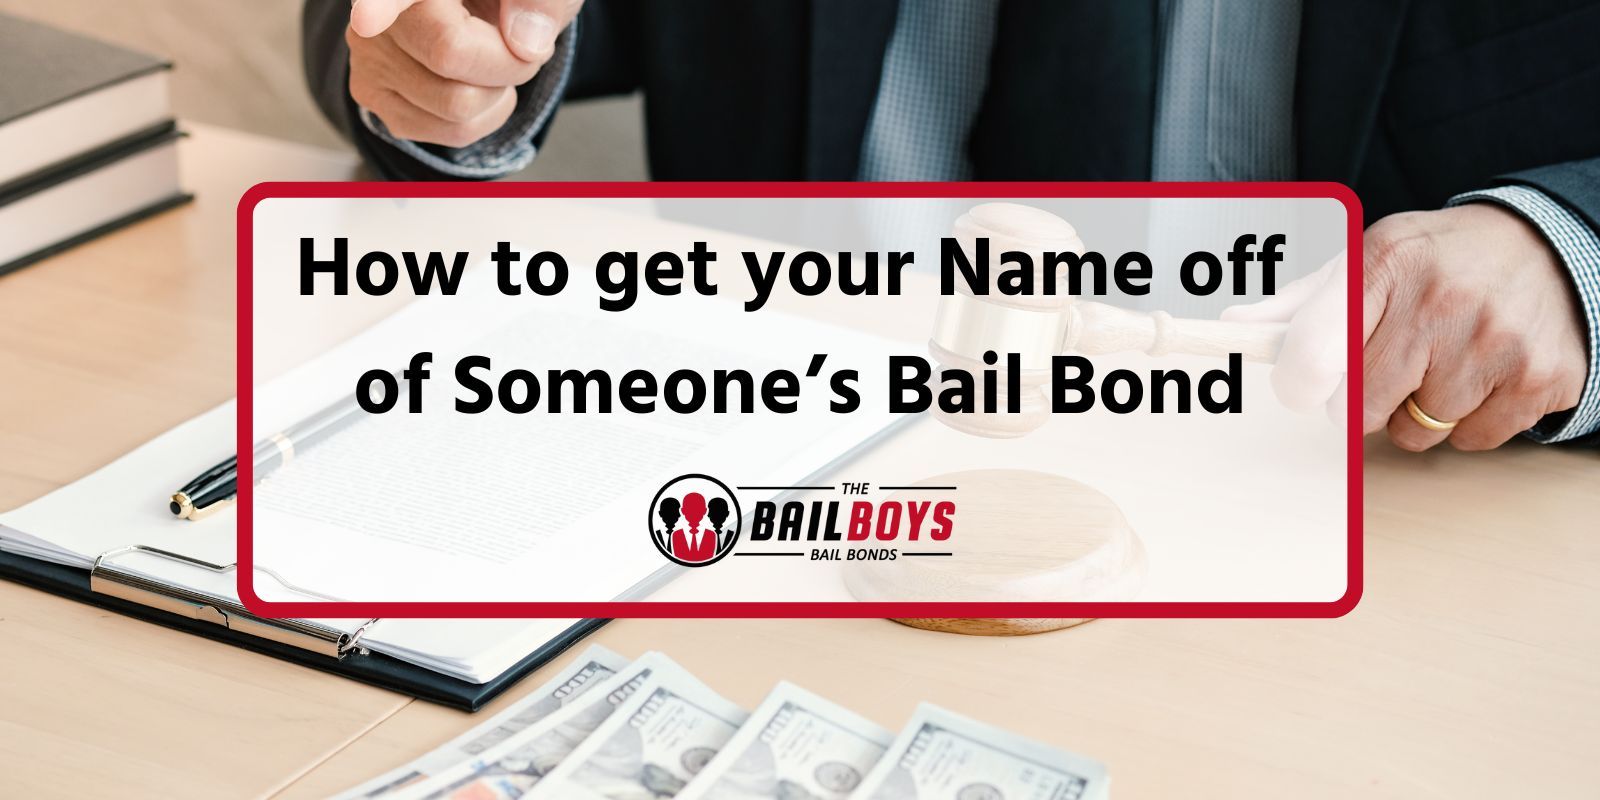 How To Get Your Name Off Of Someone's Bail Bond